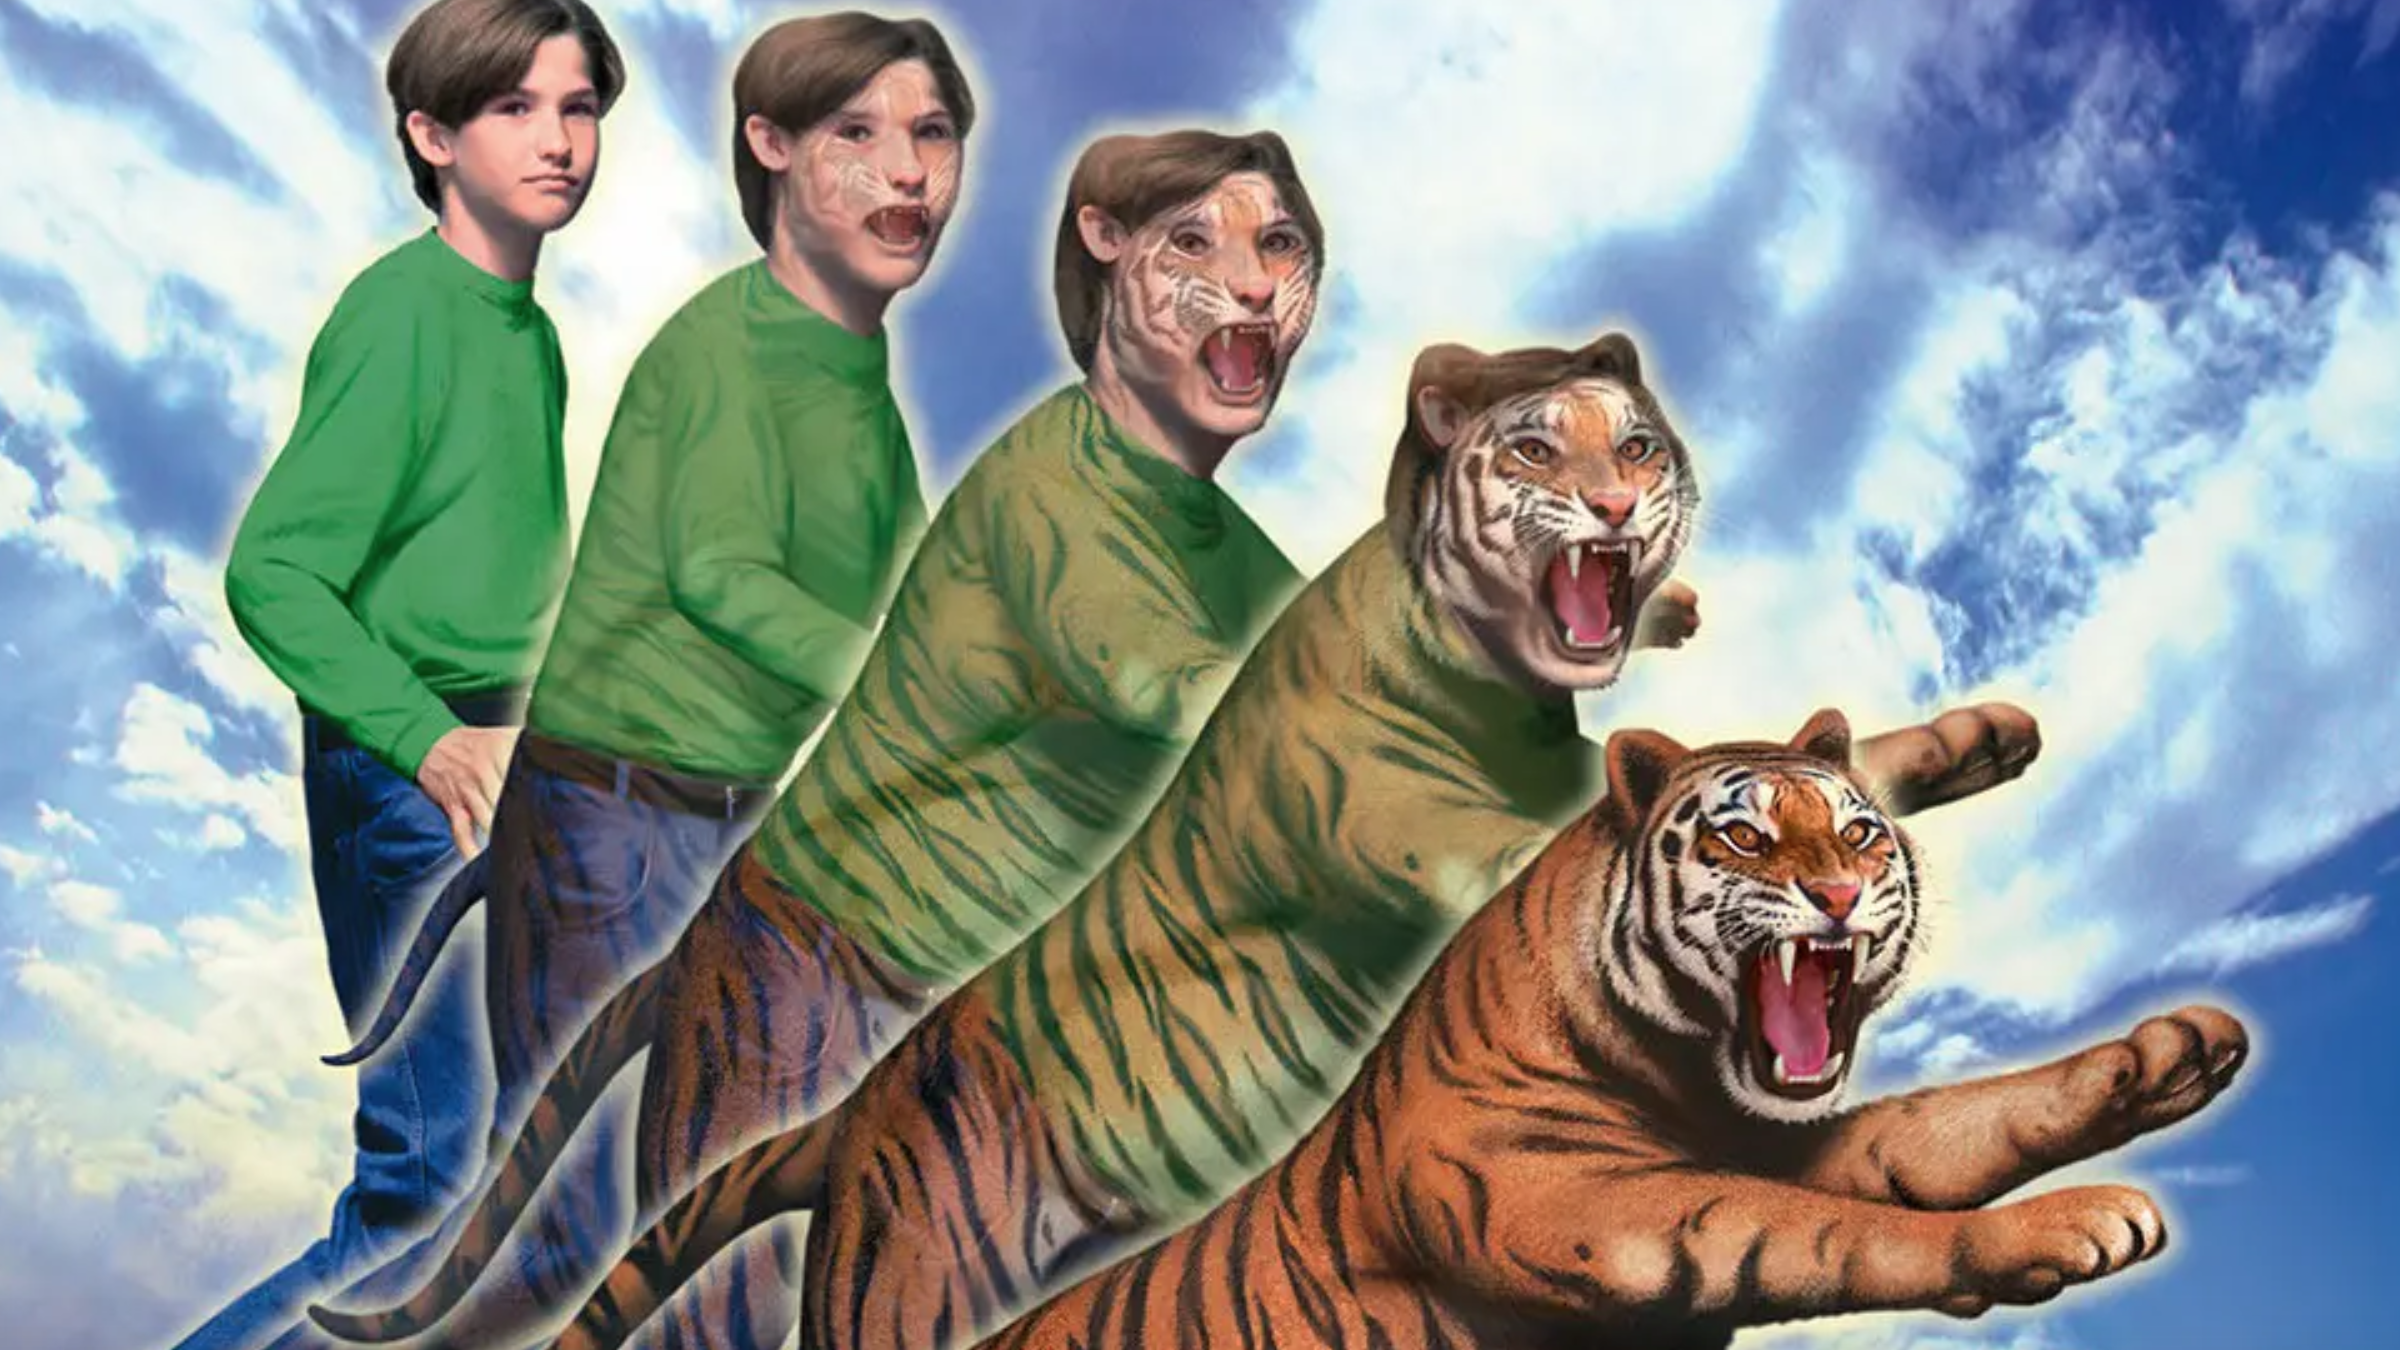 Animorphs' Movie in the Works from Scholastic Entertainment, Picturestart –  The Hollywood Reporter